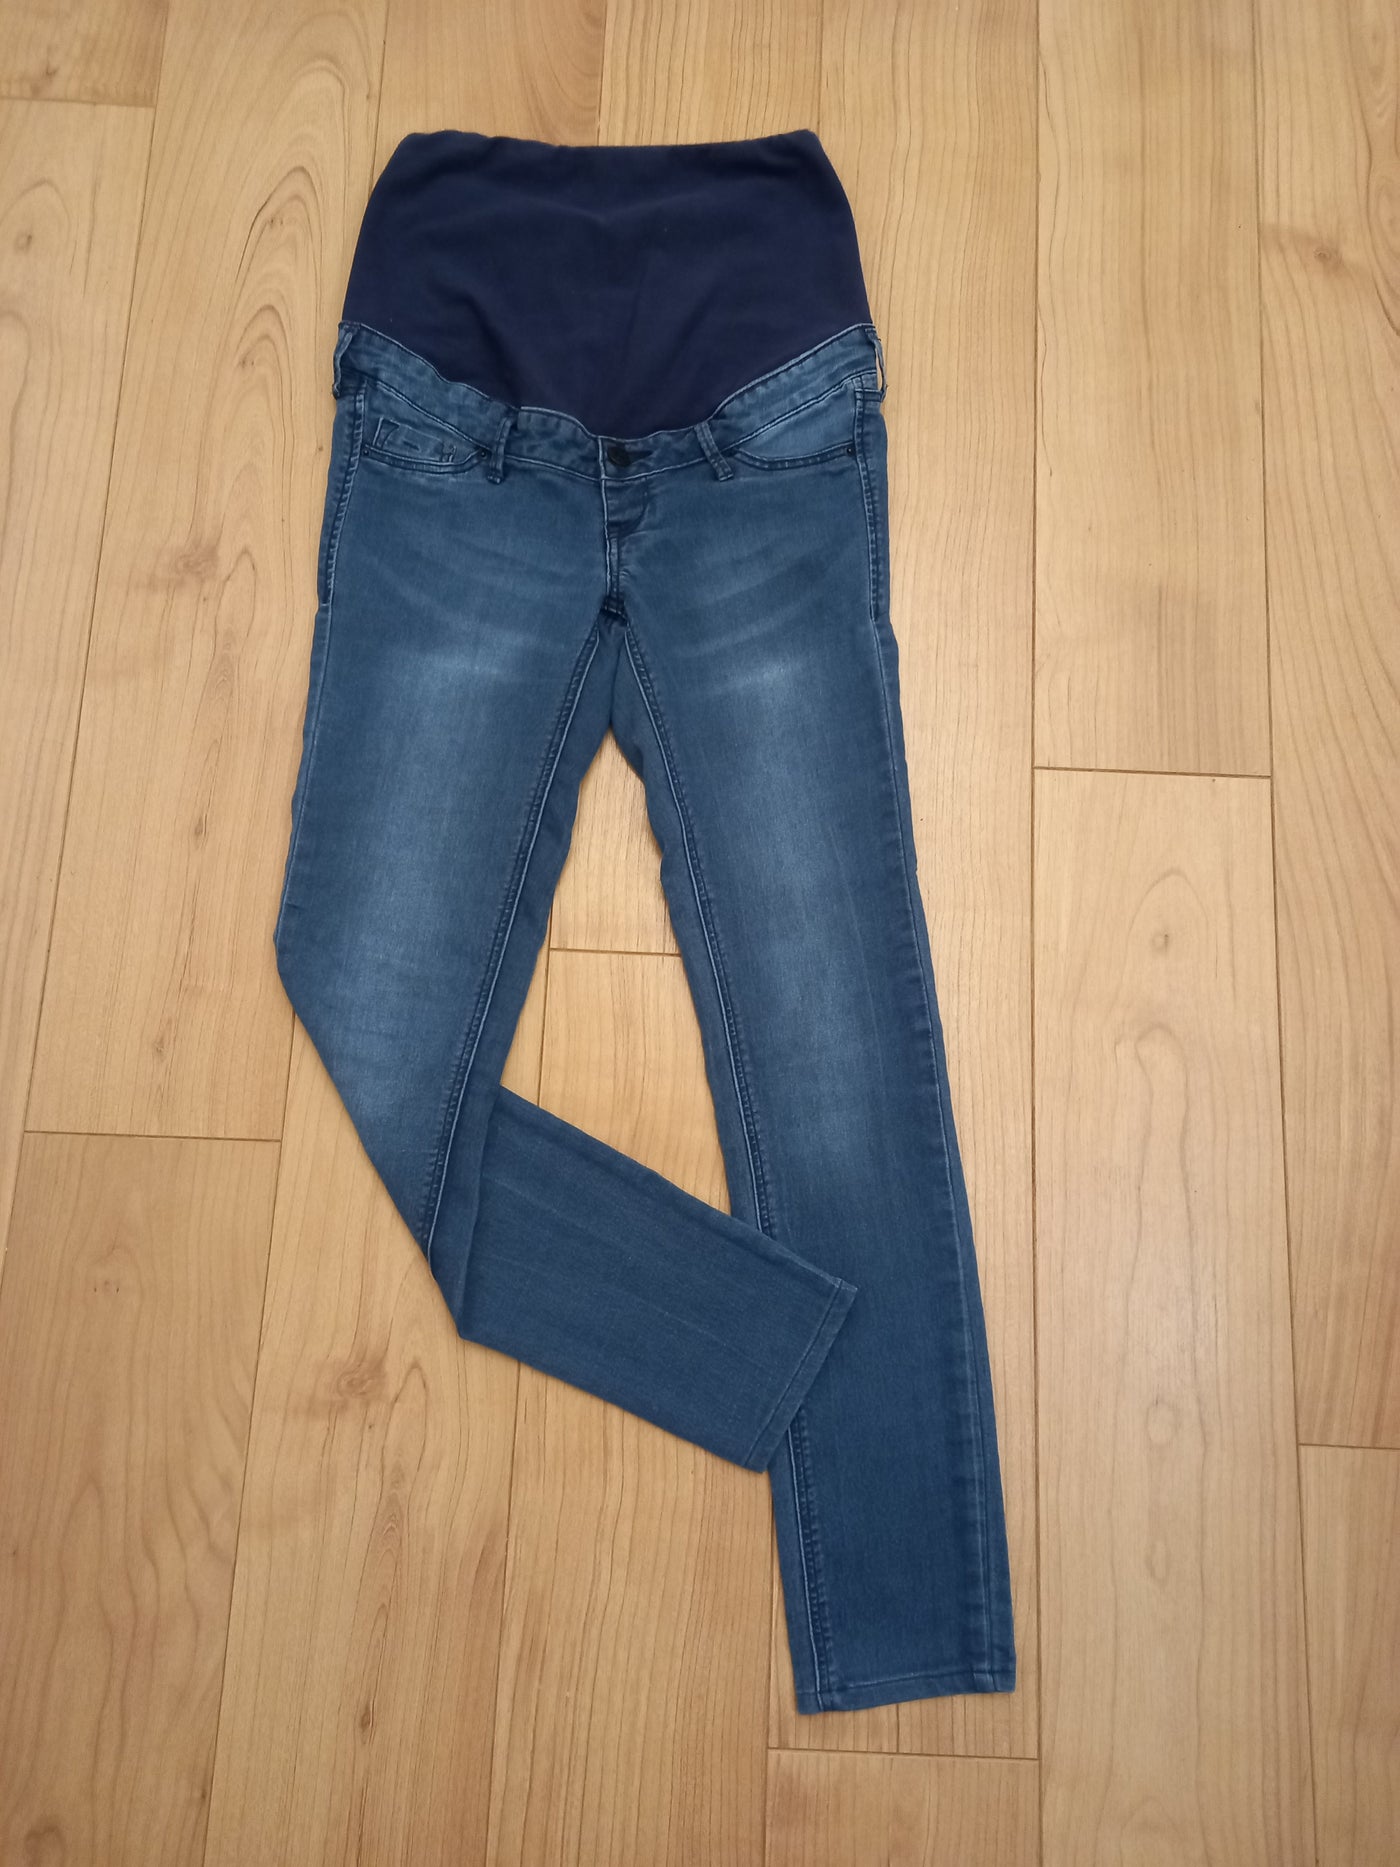 H&M Mama blue overbump skinny high rib jeans - Size EUR34 (Approx UK 6/8)